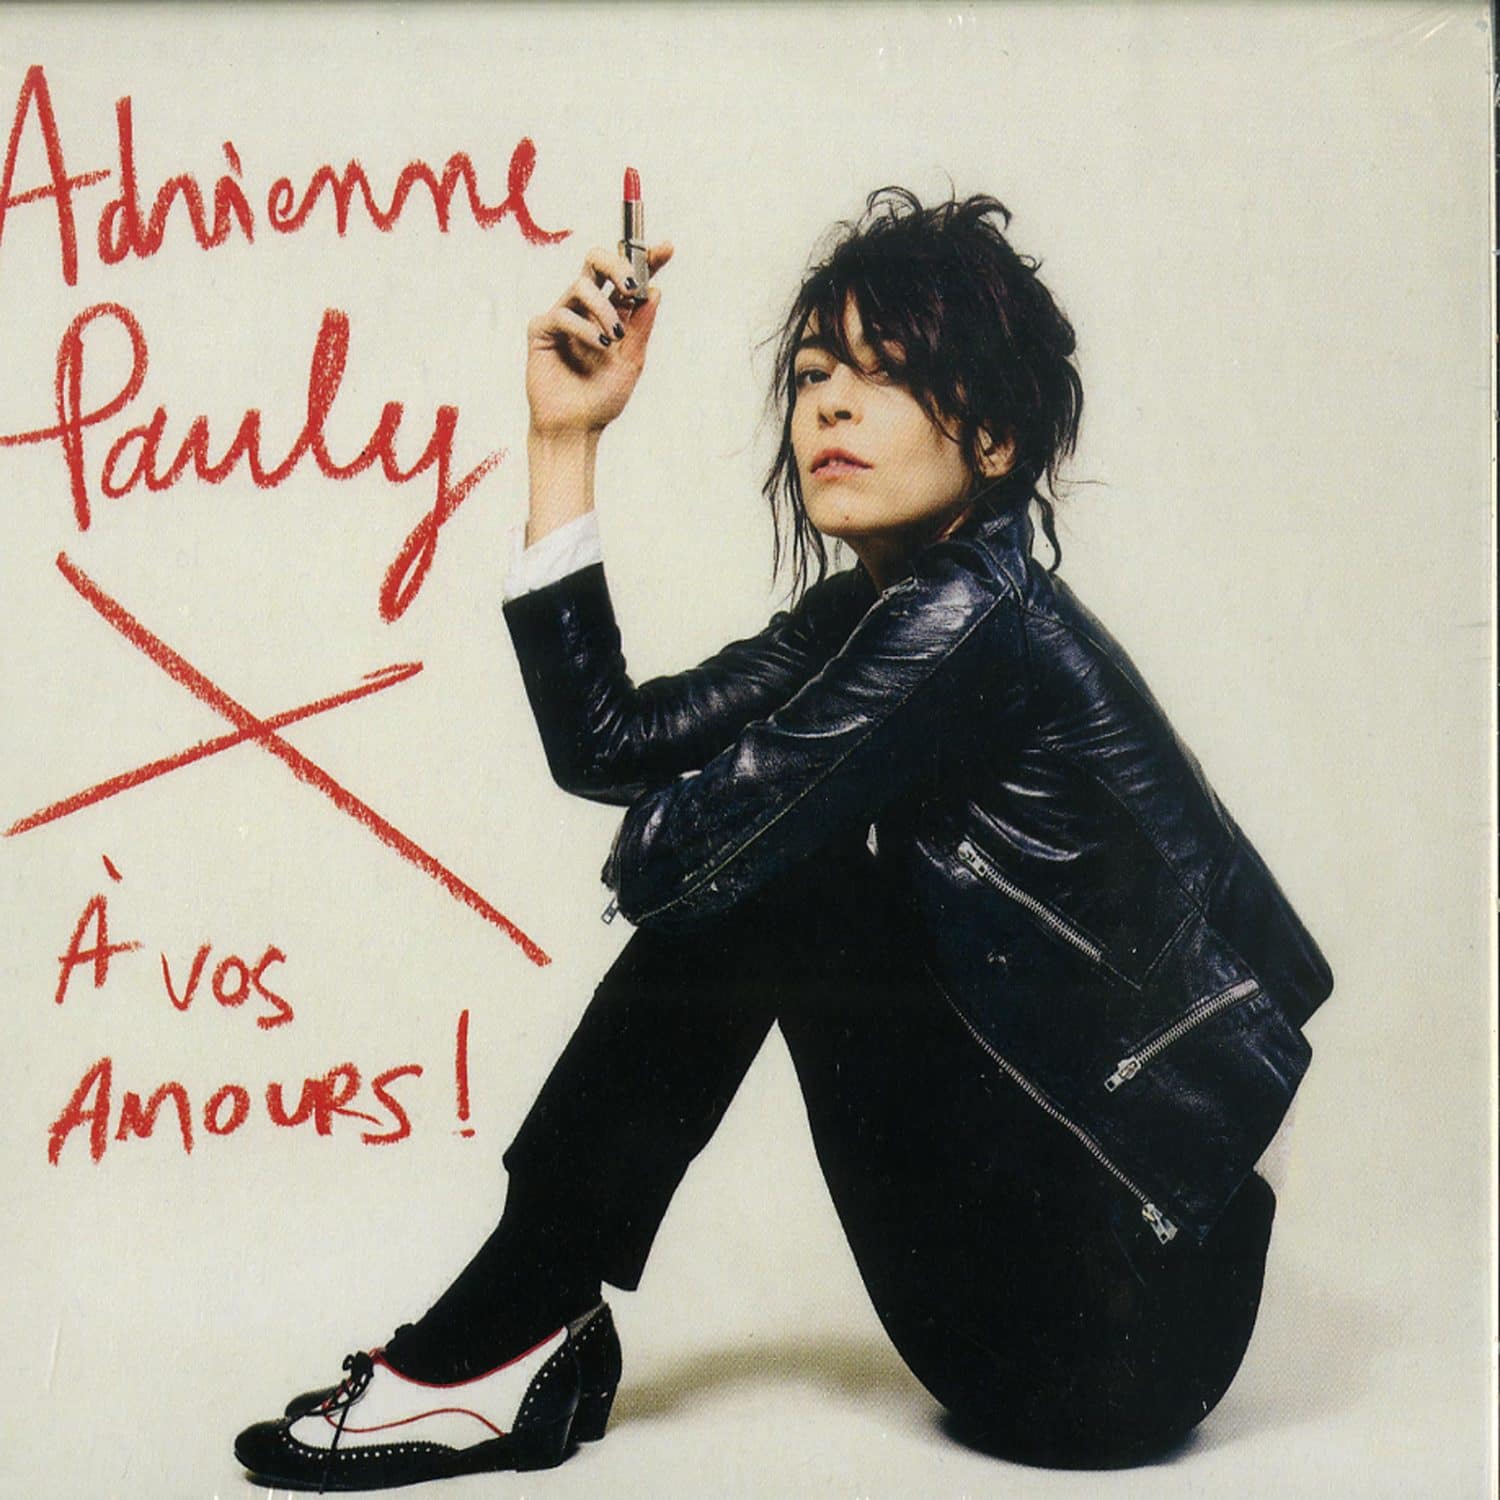 Adrienne Pauly - A VOS AMOURS 